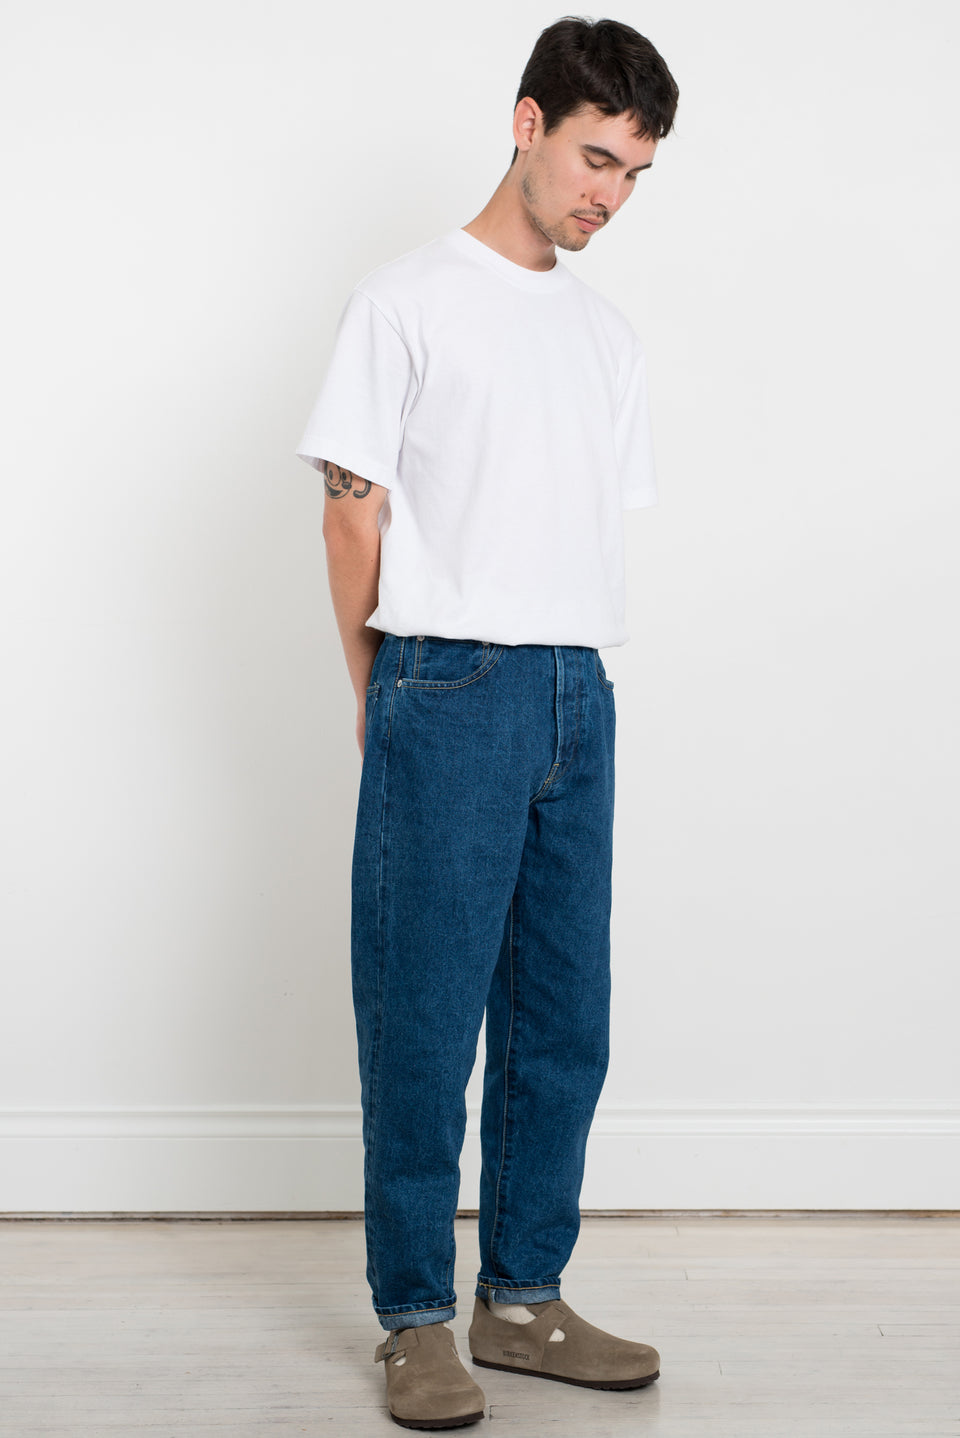 HATSKI Made in Japan SS23 Loose Tapered Washi Denim Used HTK-2001-W Calculus Victoria BC Canada